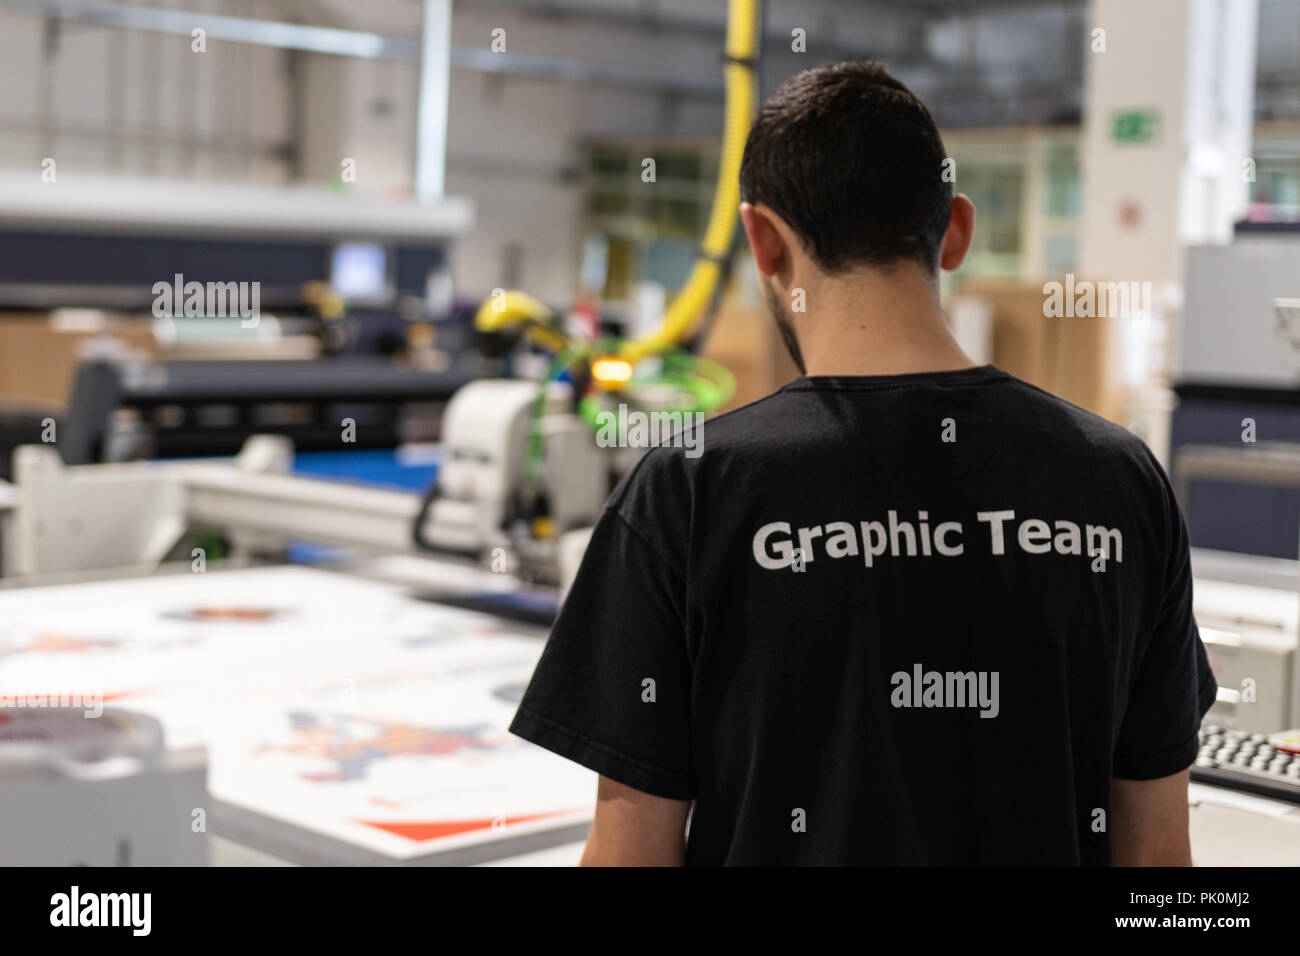 Production manager supervising every step of the project workflow, from paper supply and print setup, to quality control and packaging. Stock Photo